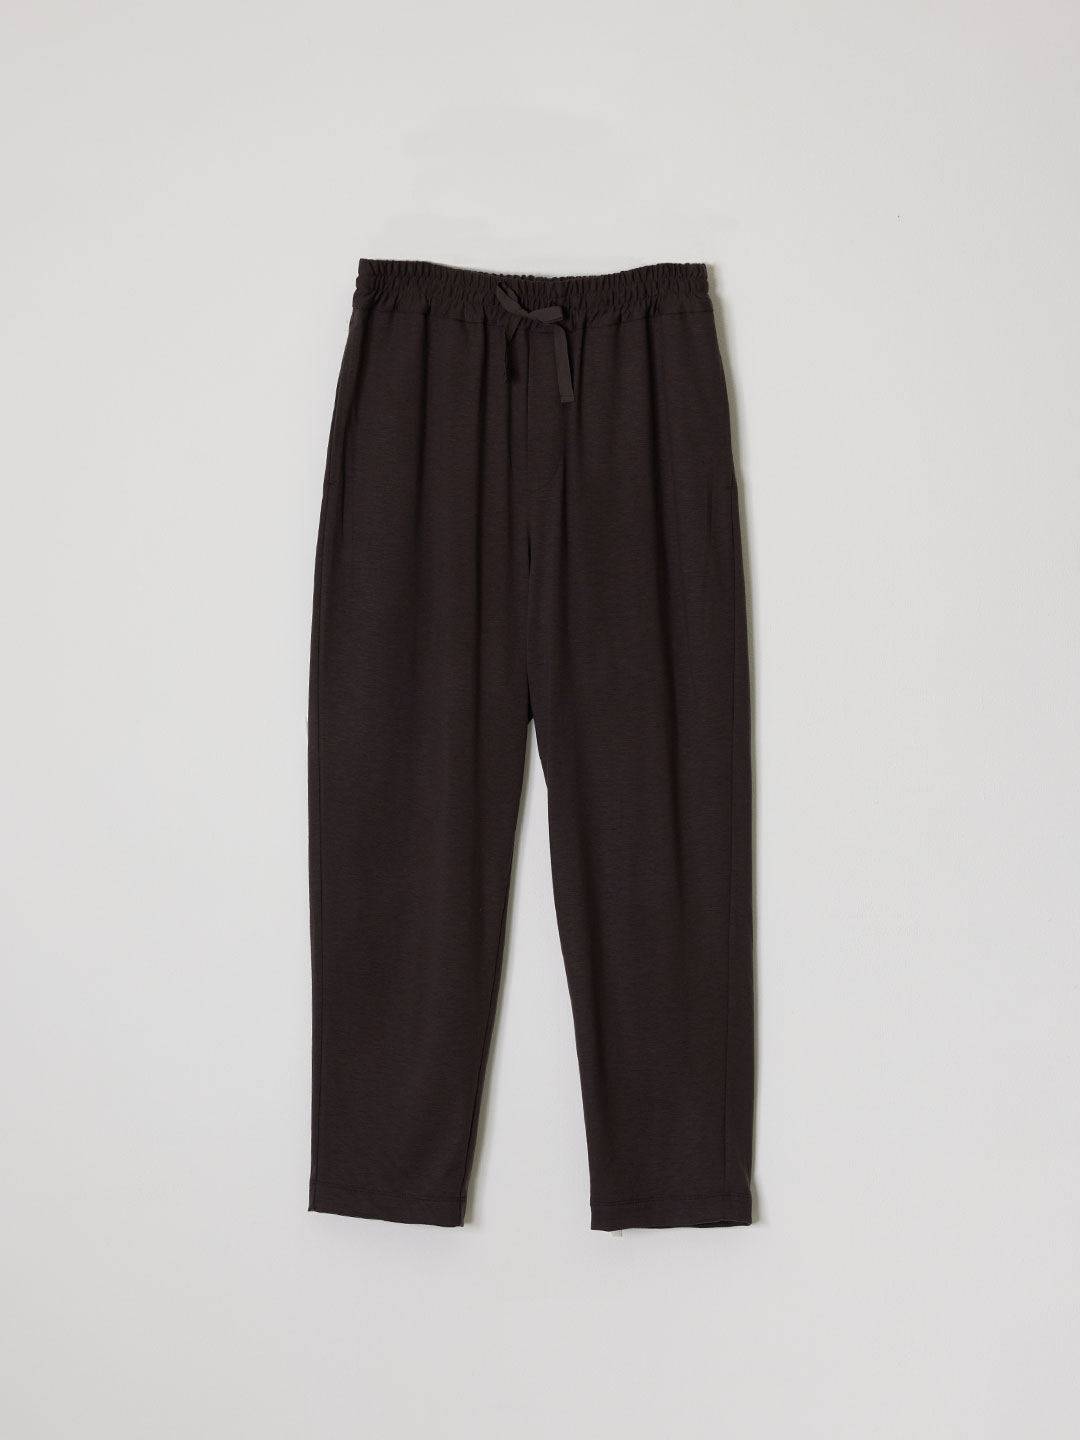 Cotton Spinning Wool Easy Pants - Brown